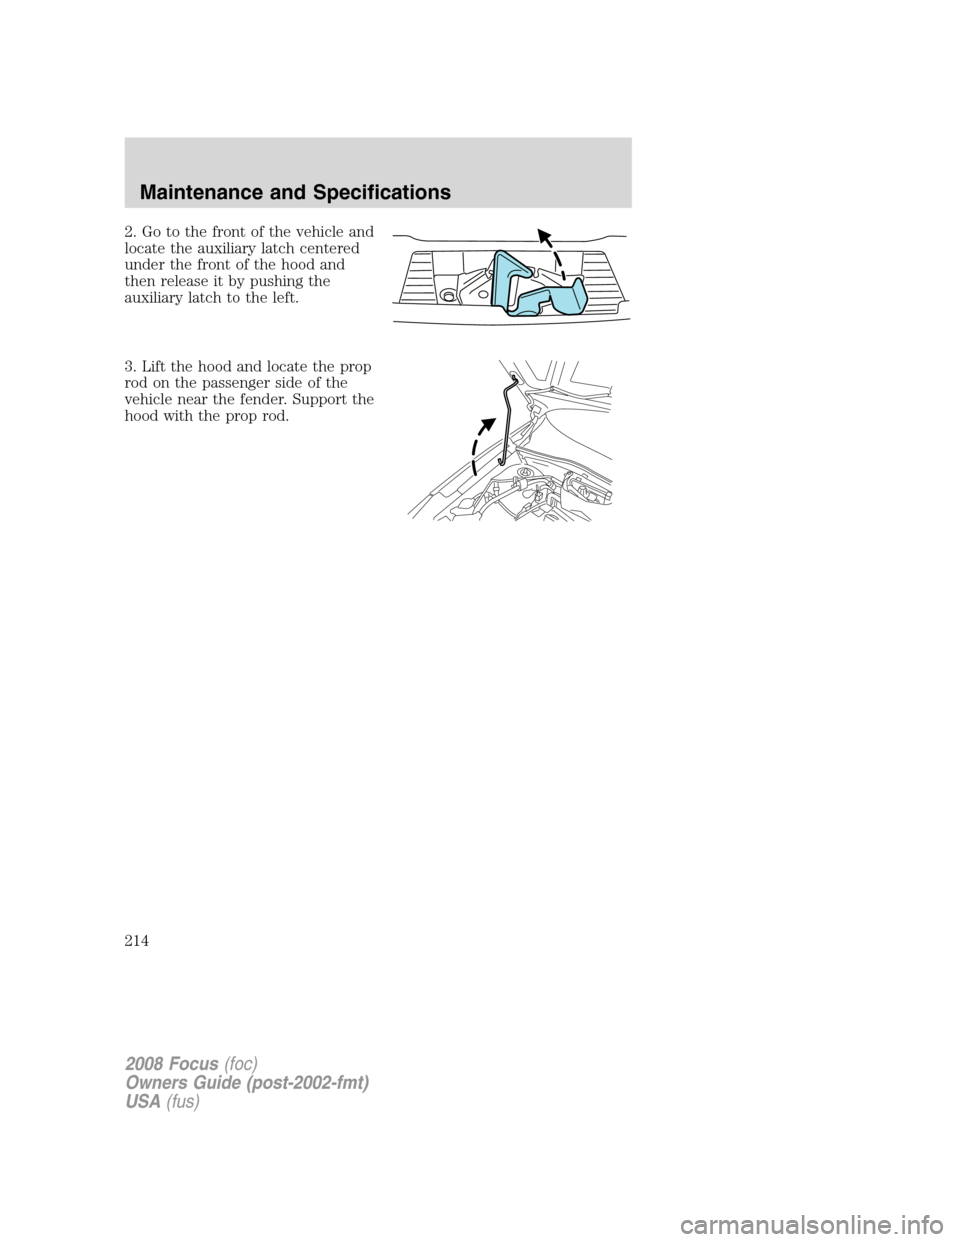 FORD FOCUS 2008 2.G User Guide 2. Go to the front of the vehicle and
locate the auxiliary latch centered
under the front of the hood and
then release it by pushing the
auxiliary latch to the left.
3. Lift the hood and locate the pr